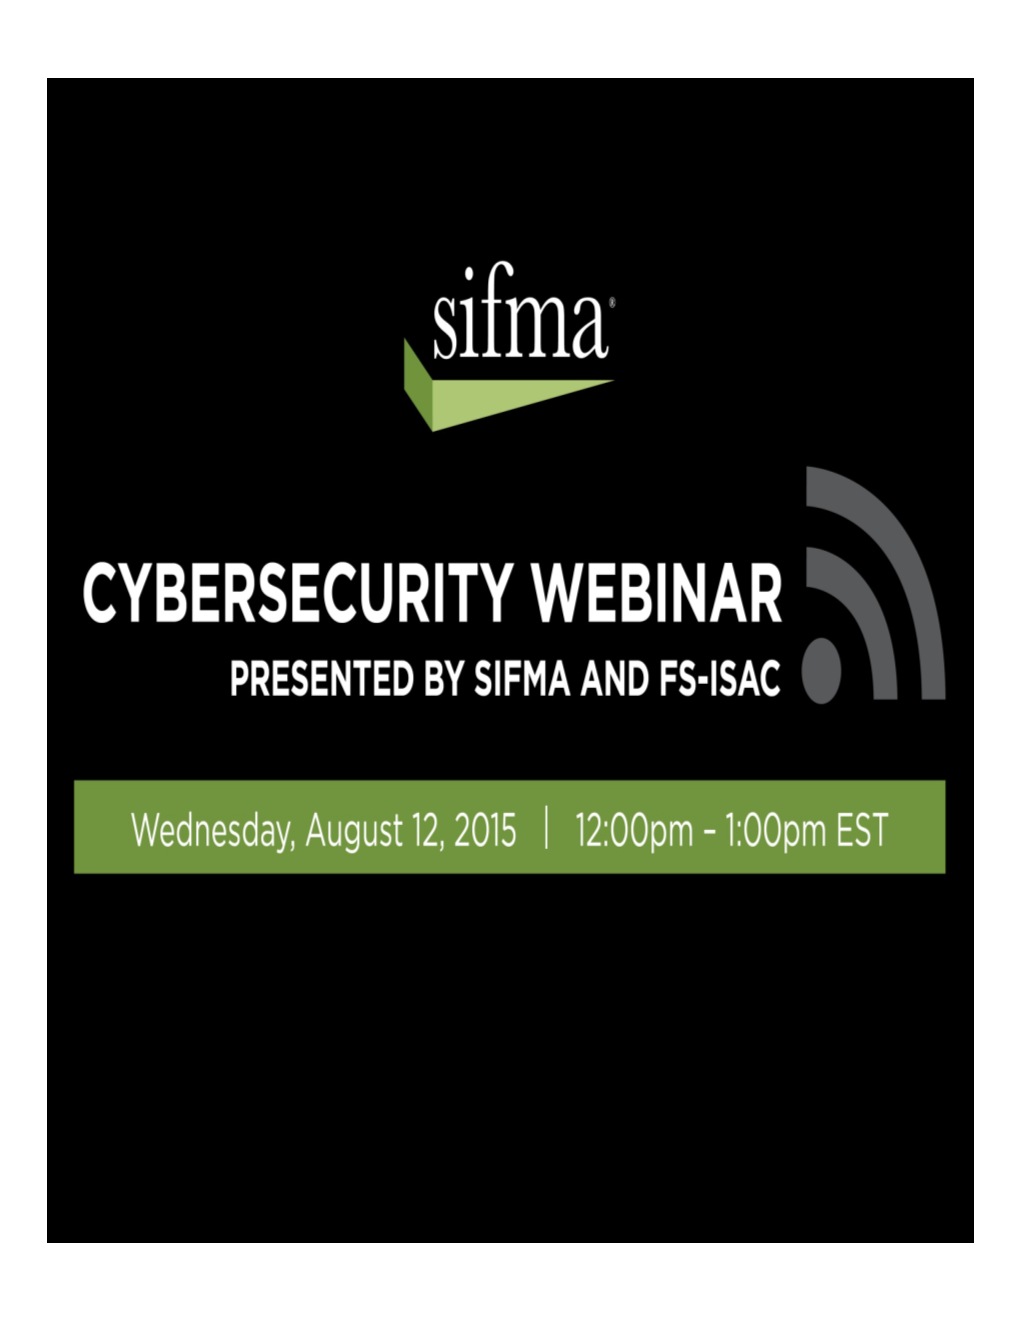 SIFMA and FS-ISAC Cybesecurity Webinar